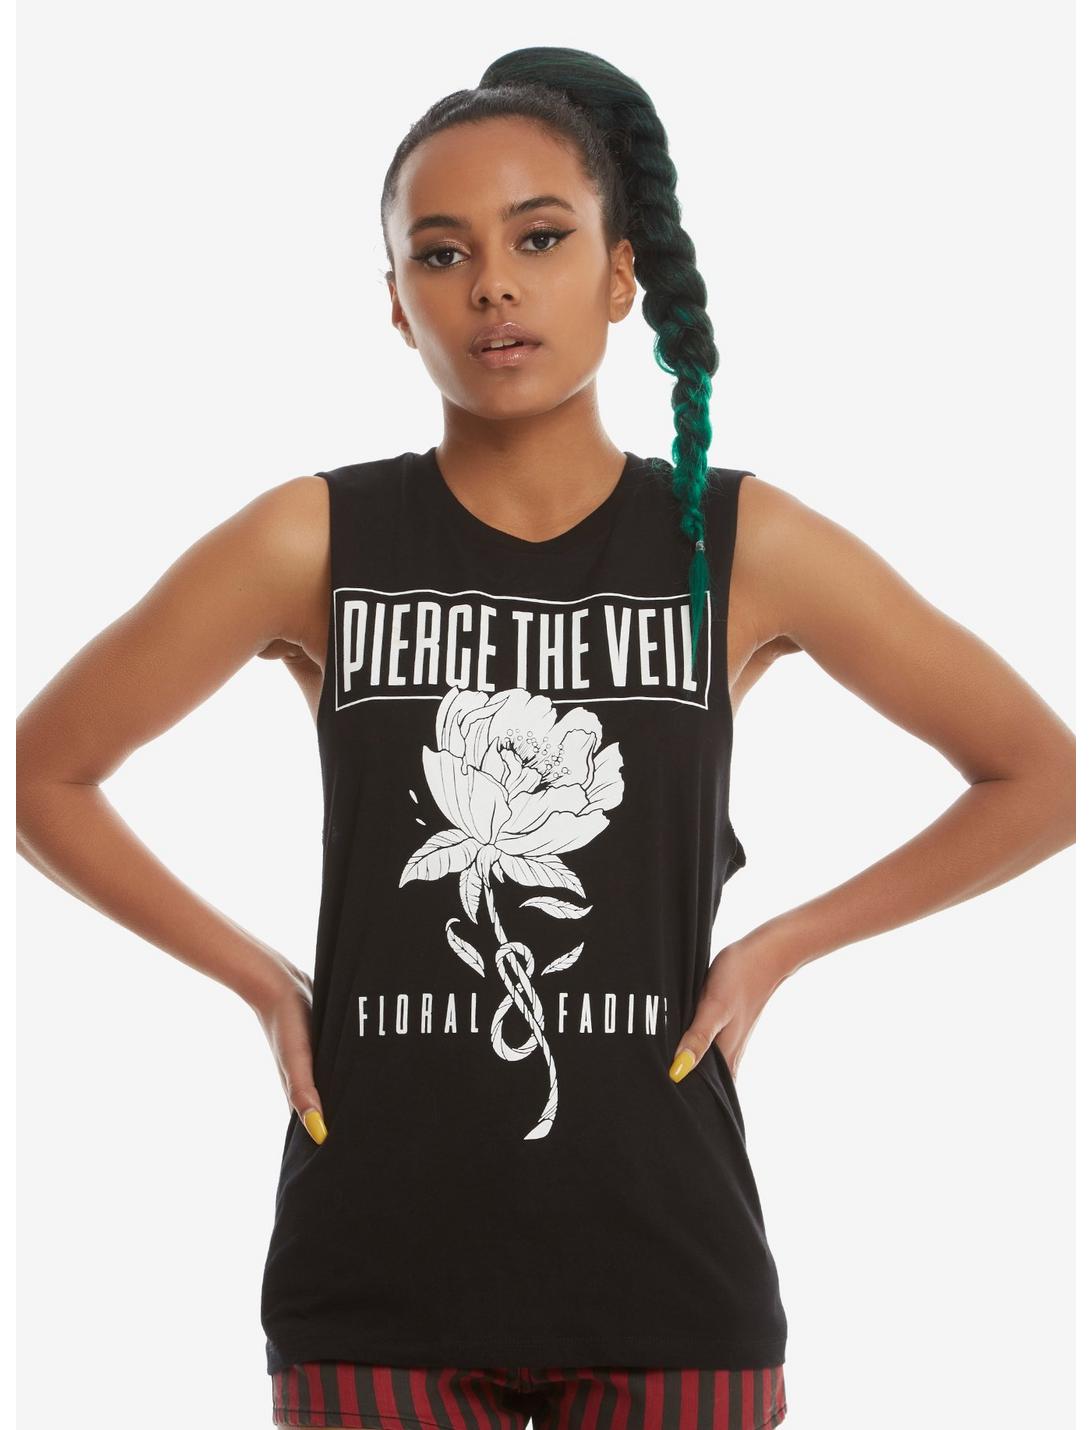 Pierce The Veil Floral & Fading Girls Muscle Top, BLACK, hi-res